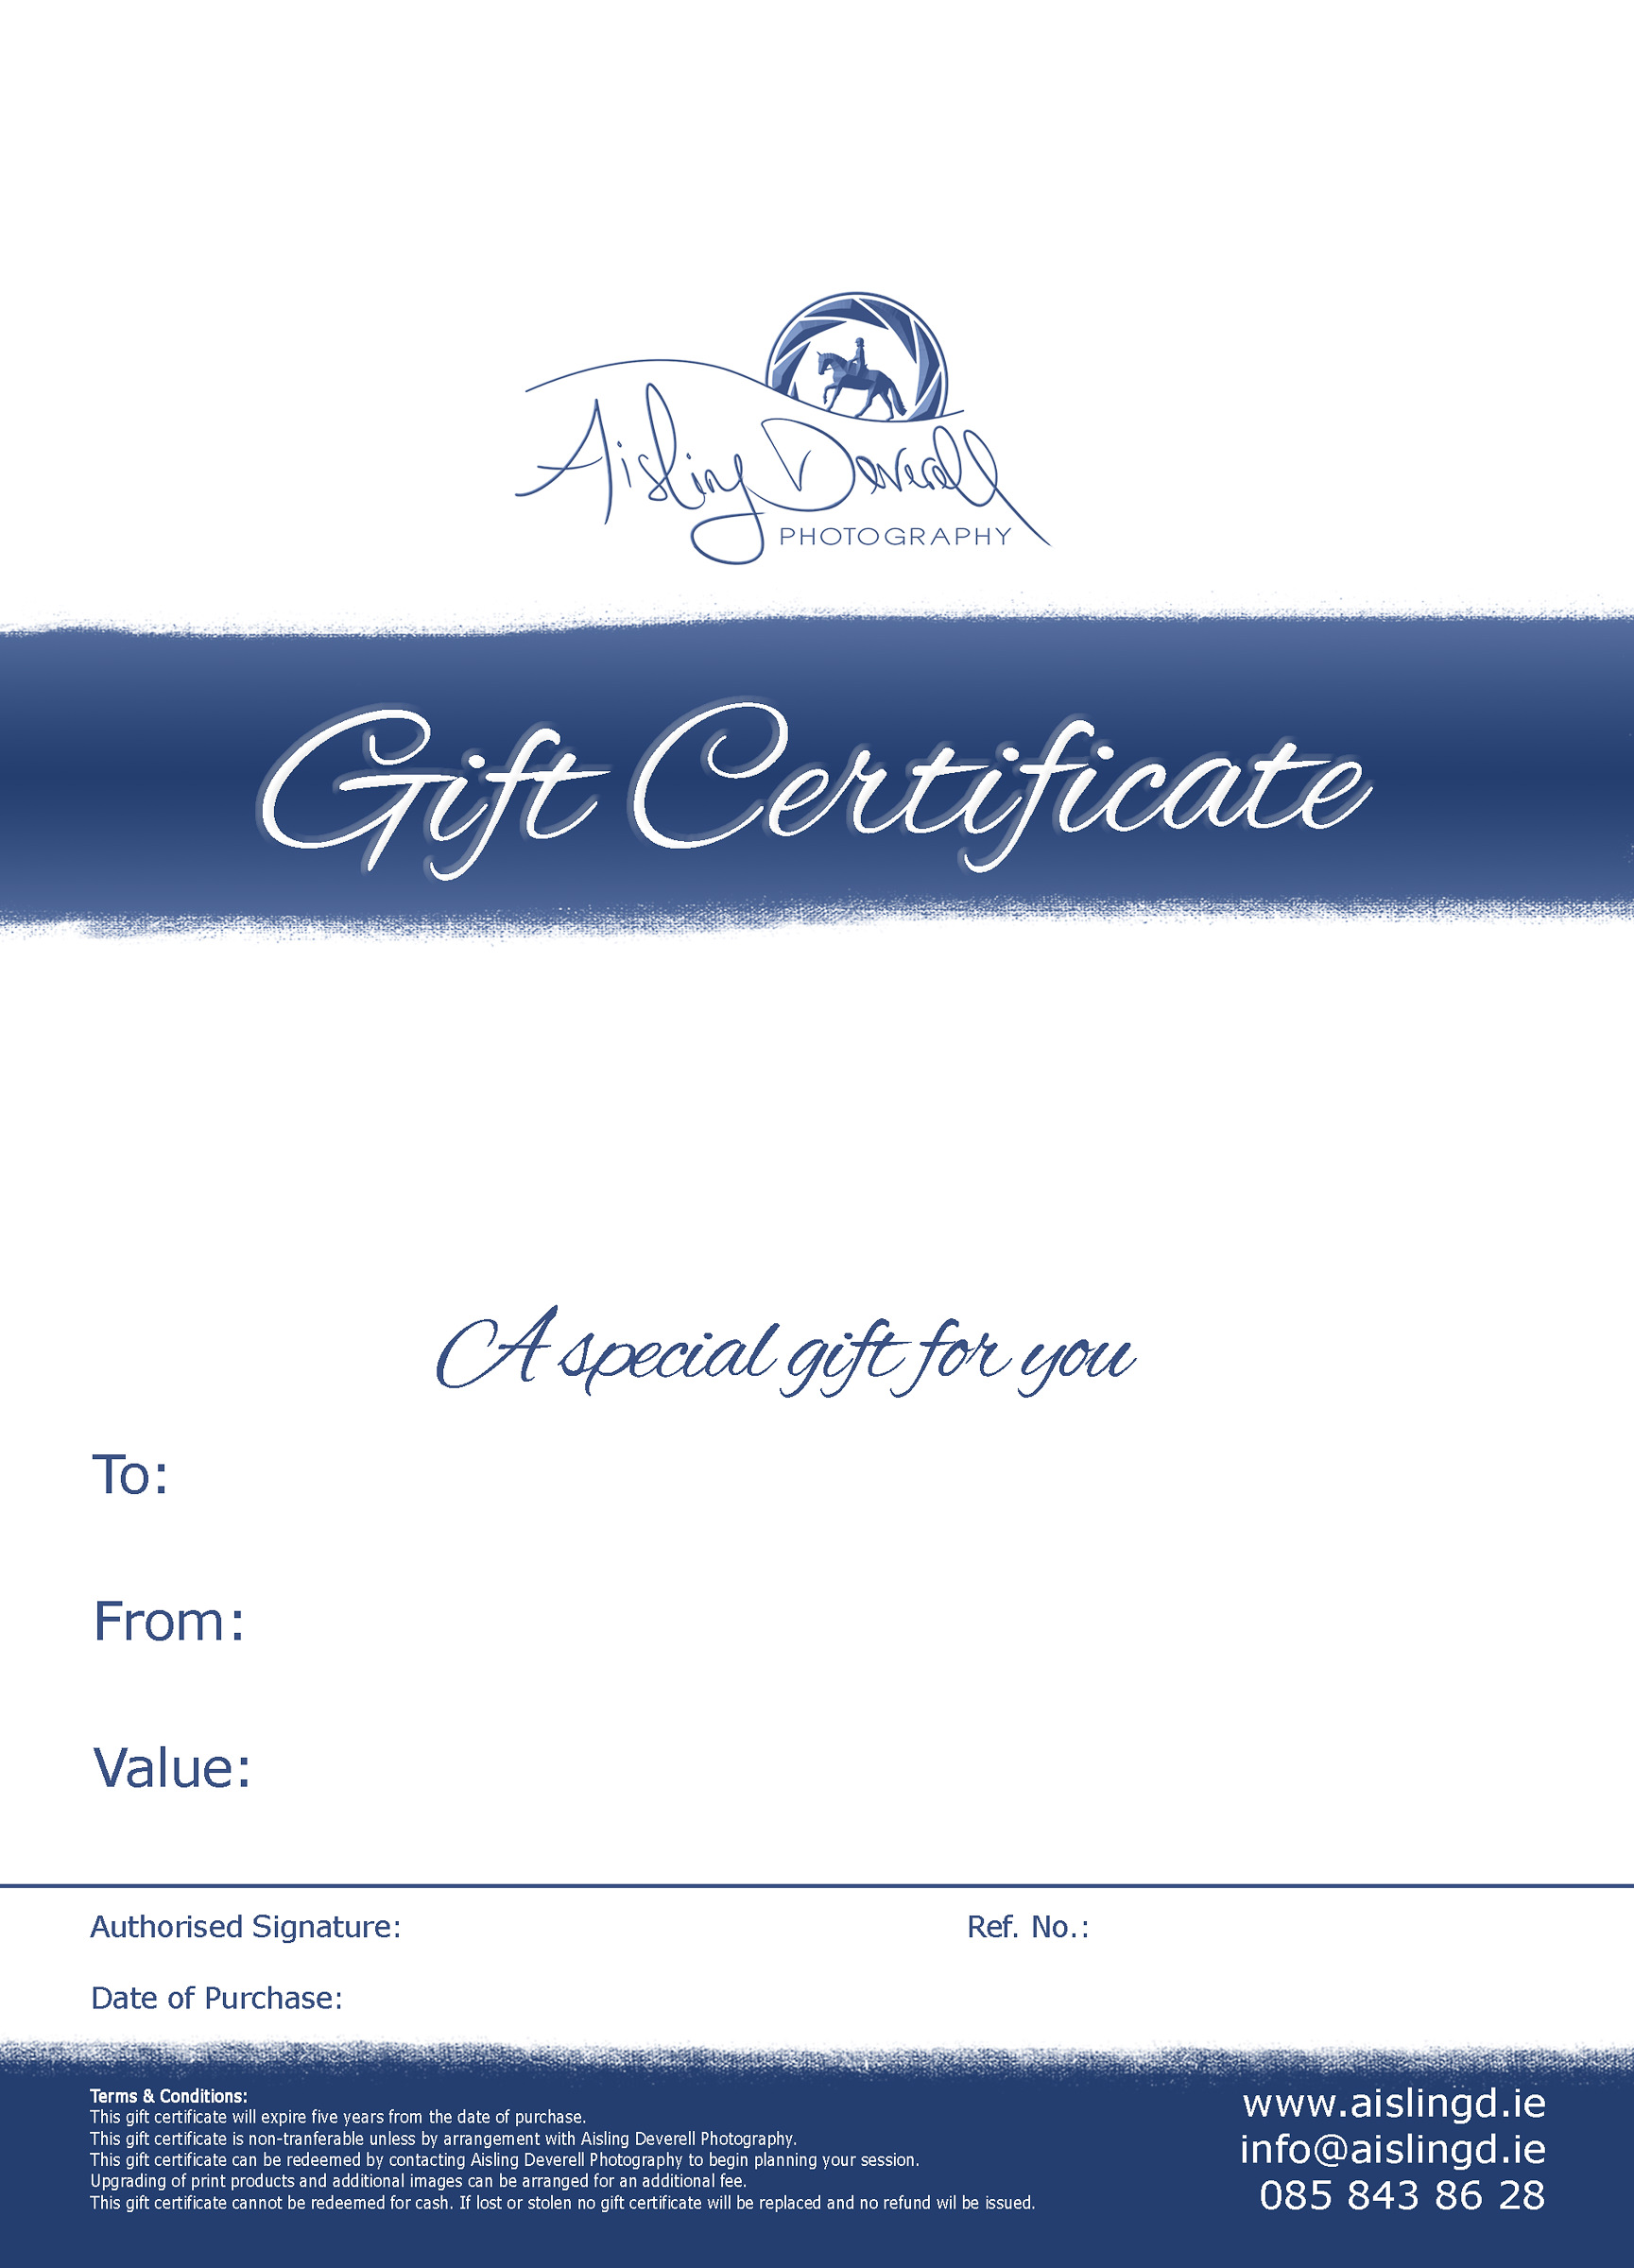 Aisling Deverell Photography Gift Certificate image